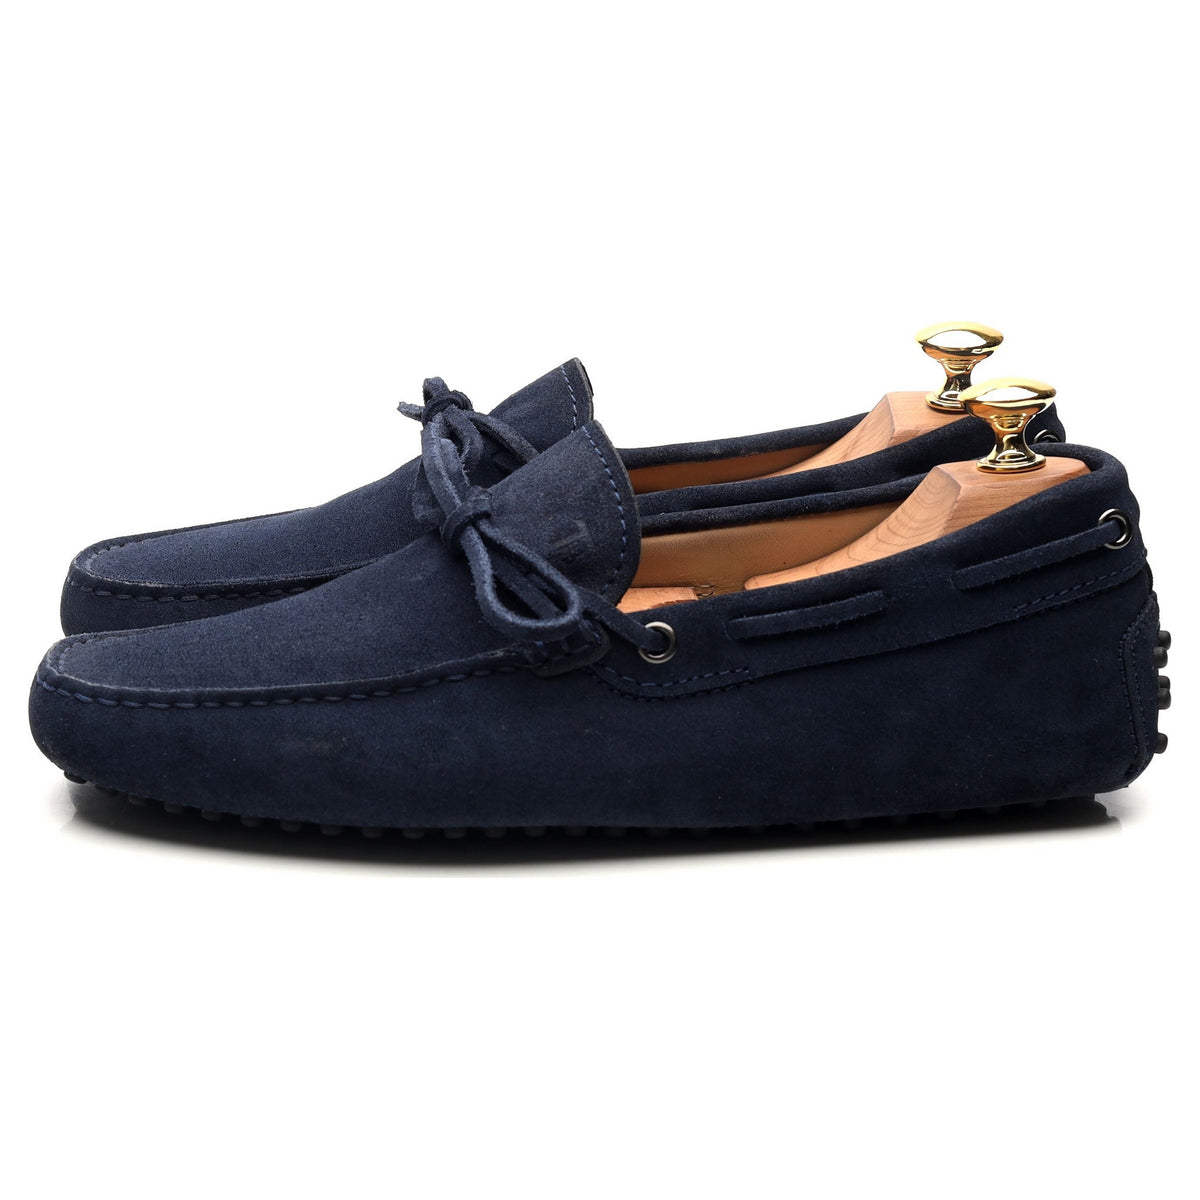 Gommino Navy Blue Suede Driving Loafers UK 6.5